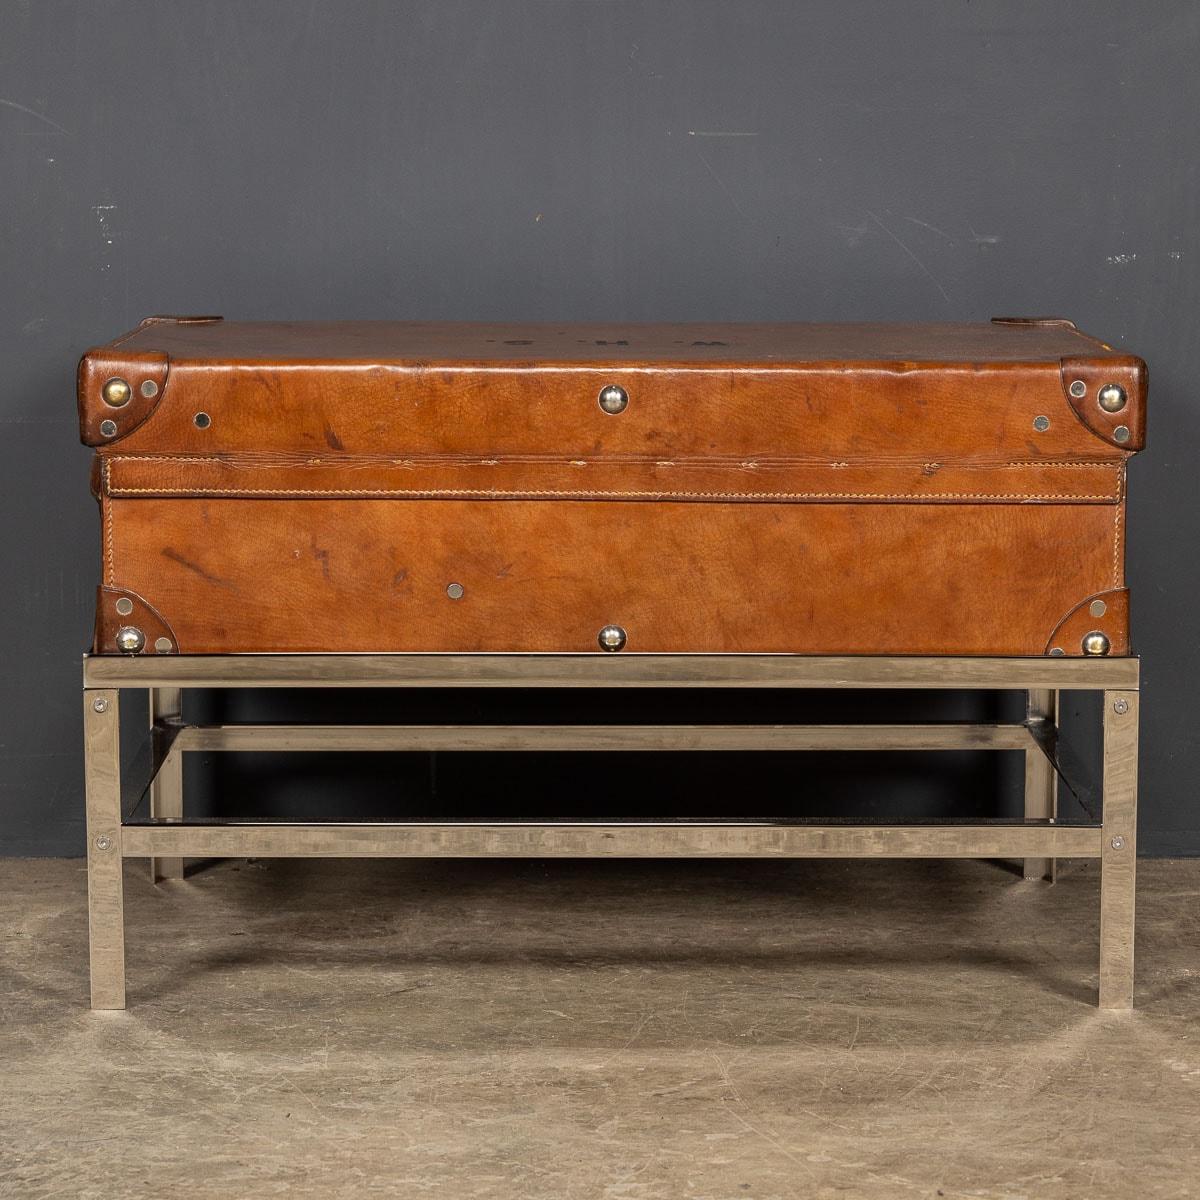 British 20th Century English Leather Trunk On Metal Stand, c.1910 For Sale